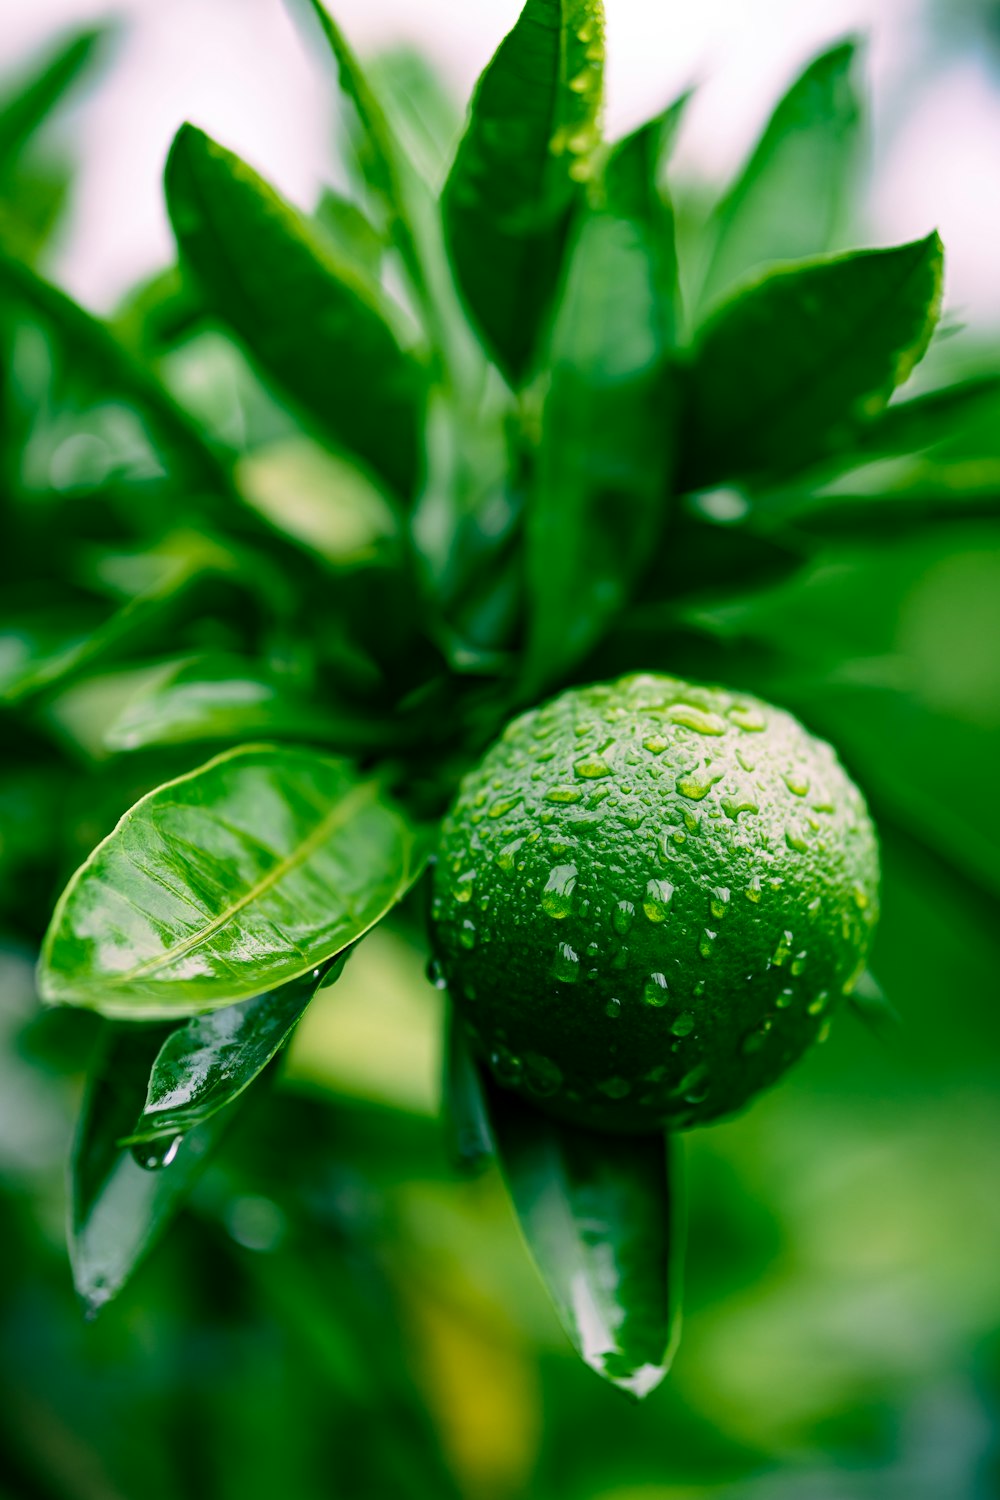 a green fruit on a plant